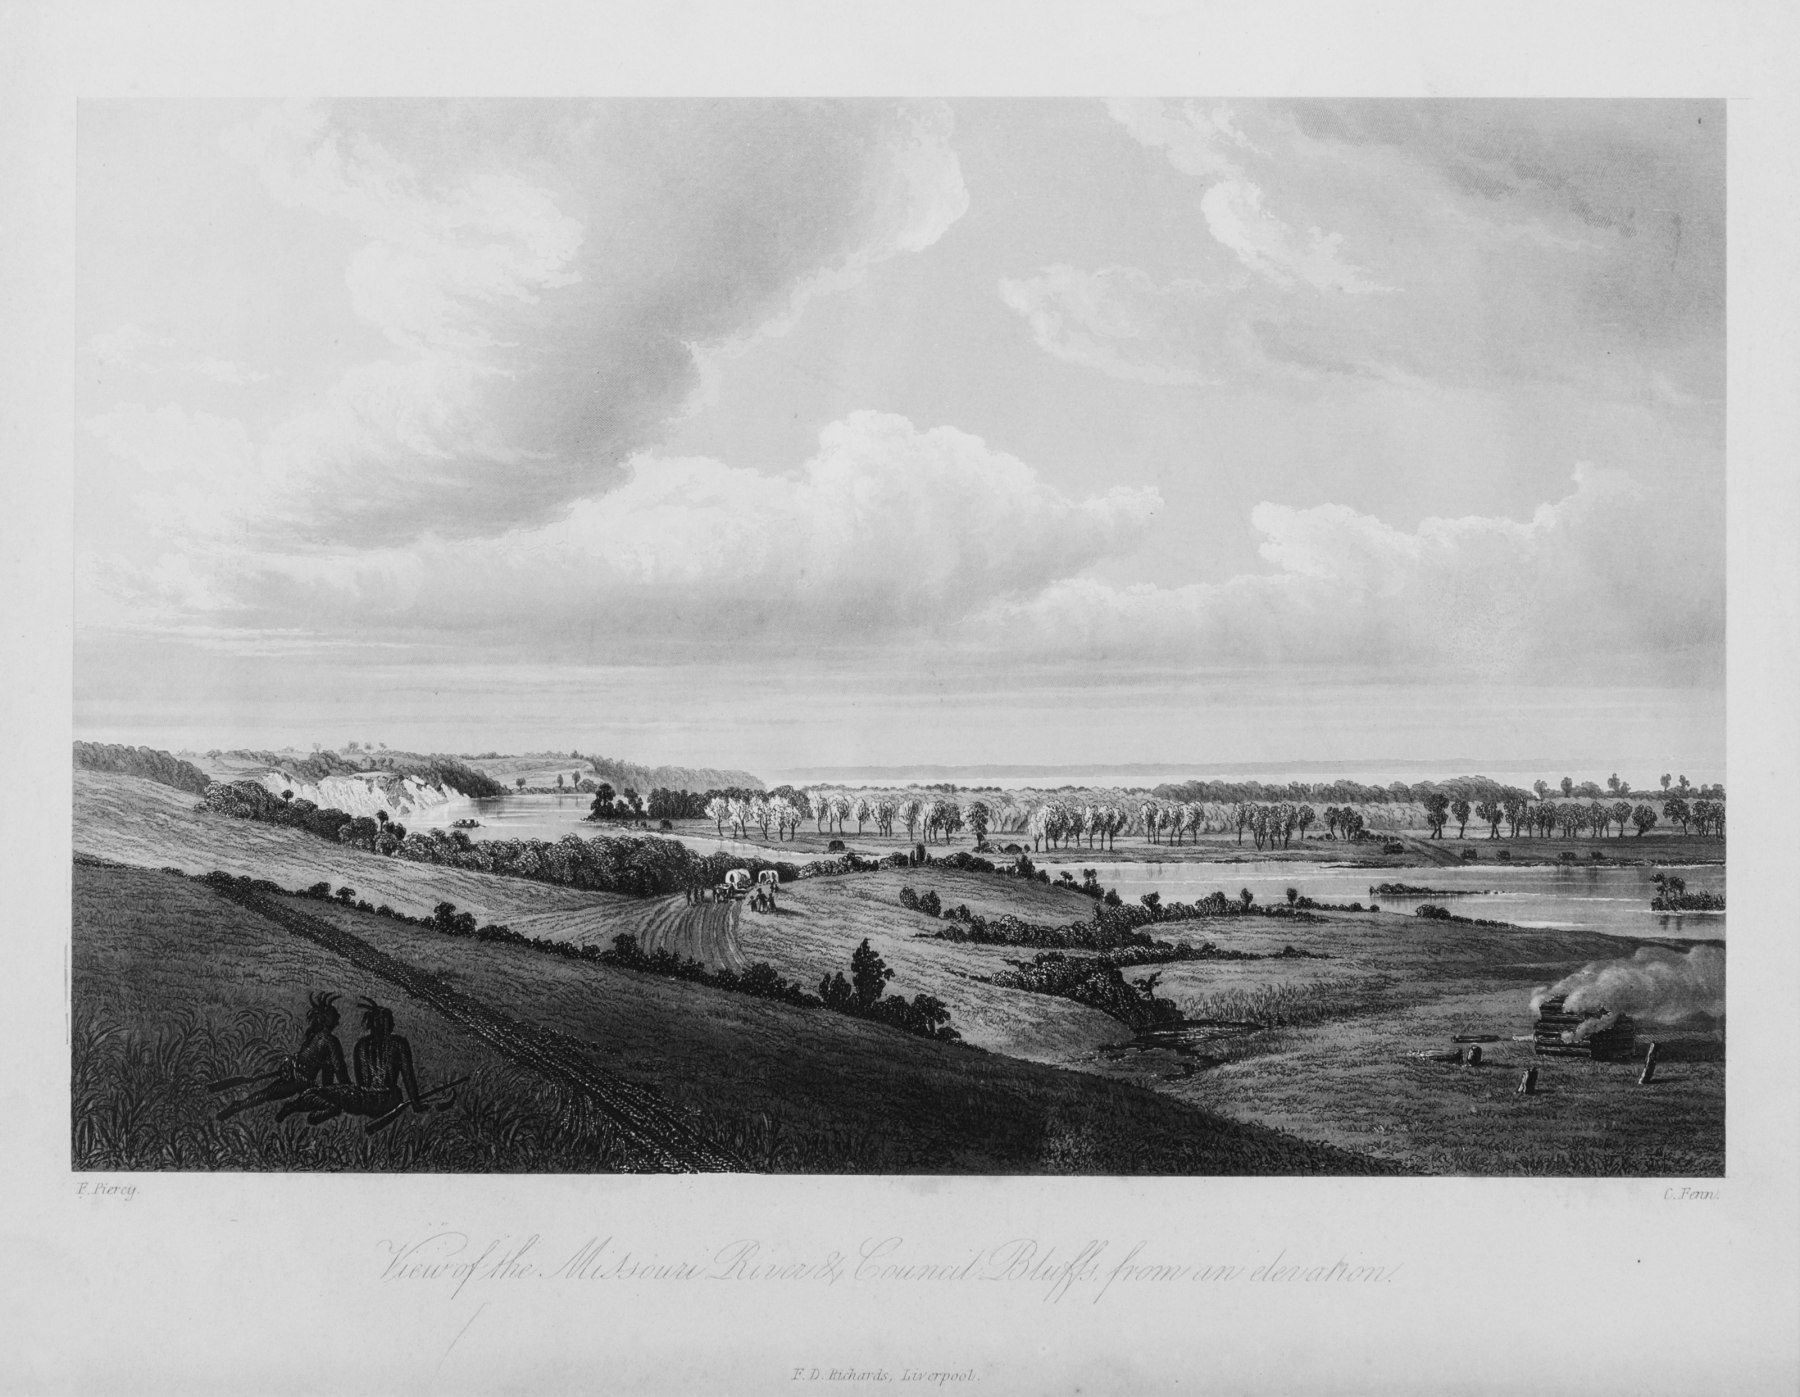 View of the Missouri River, Council Bluffs